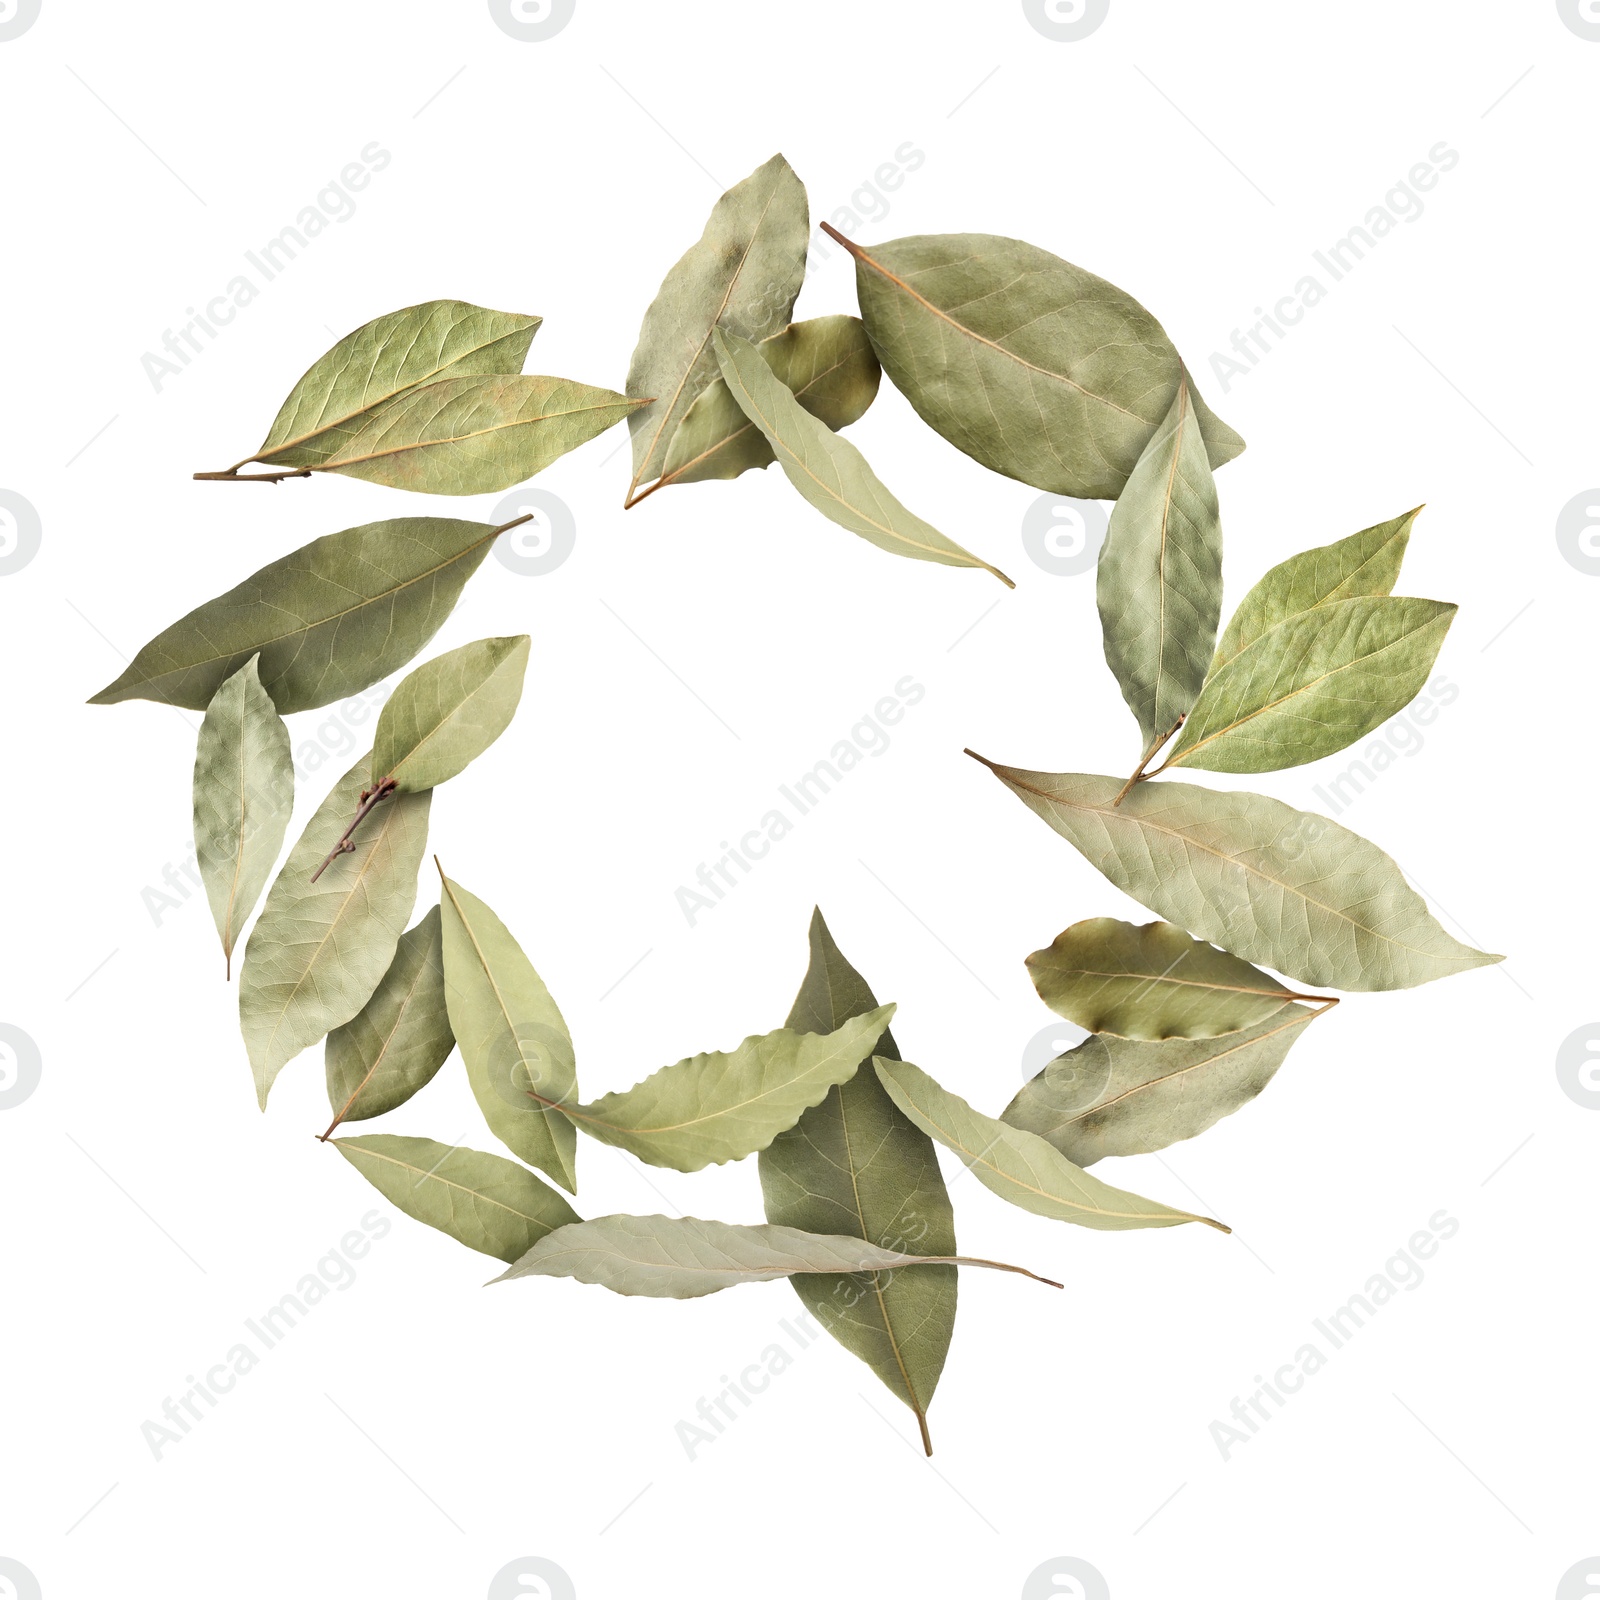 Image of Circle of dry bay leaves on white background